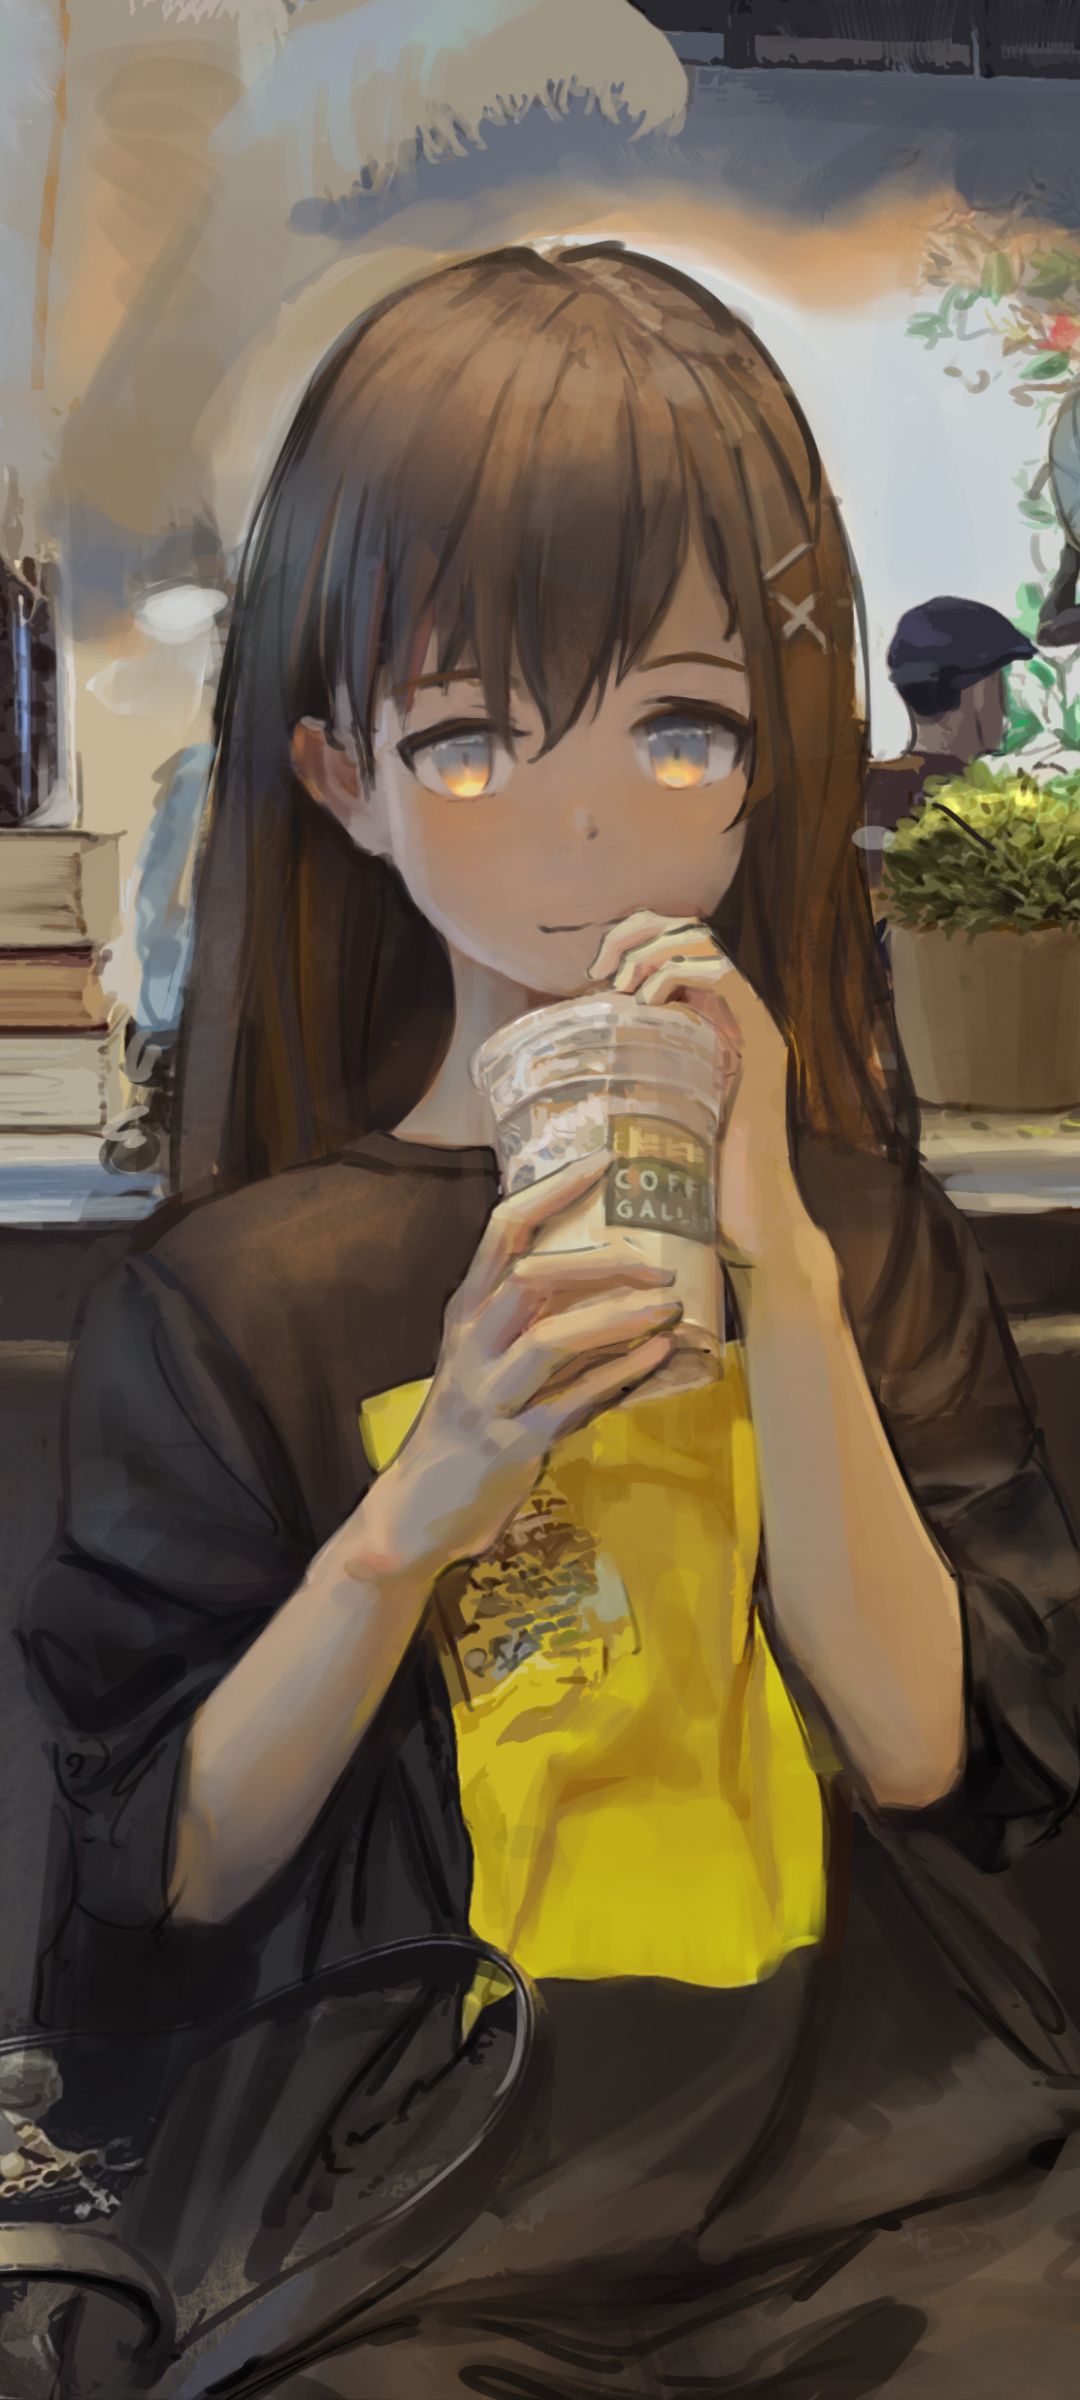 Aesthetic anime girl with brown hair and yellow shirt holding a drink. - Anime girl